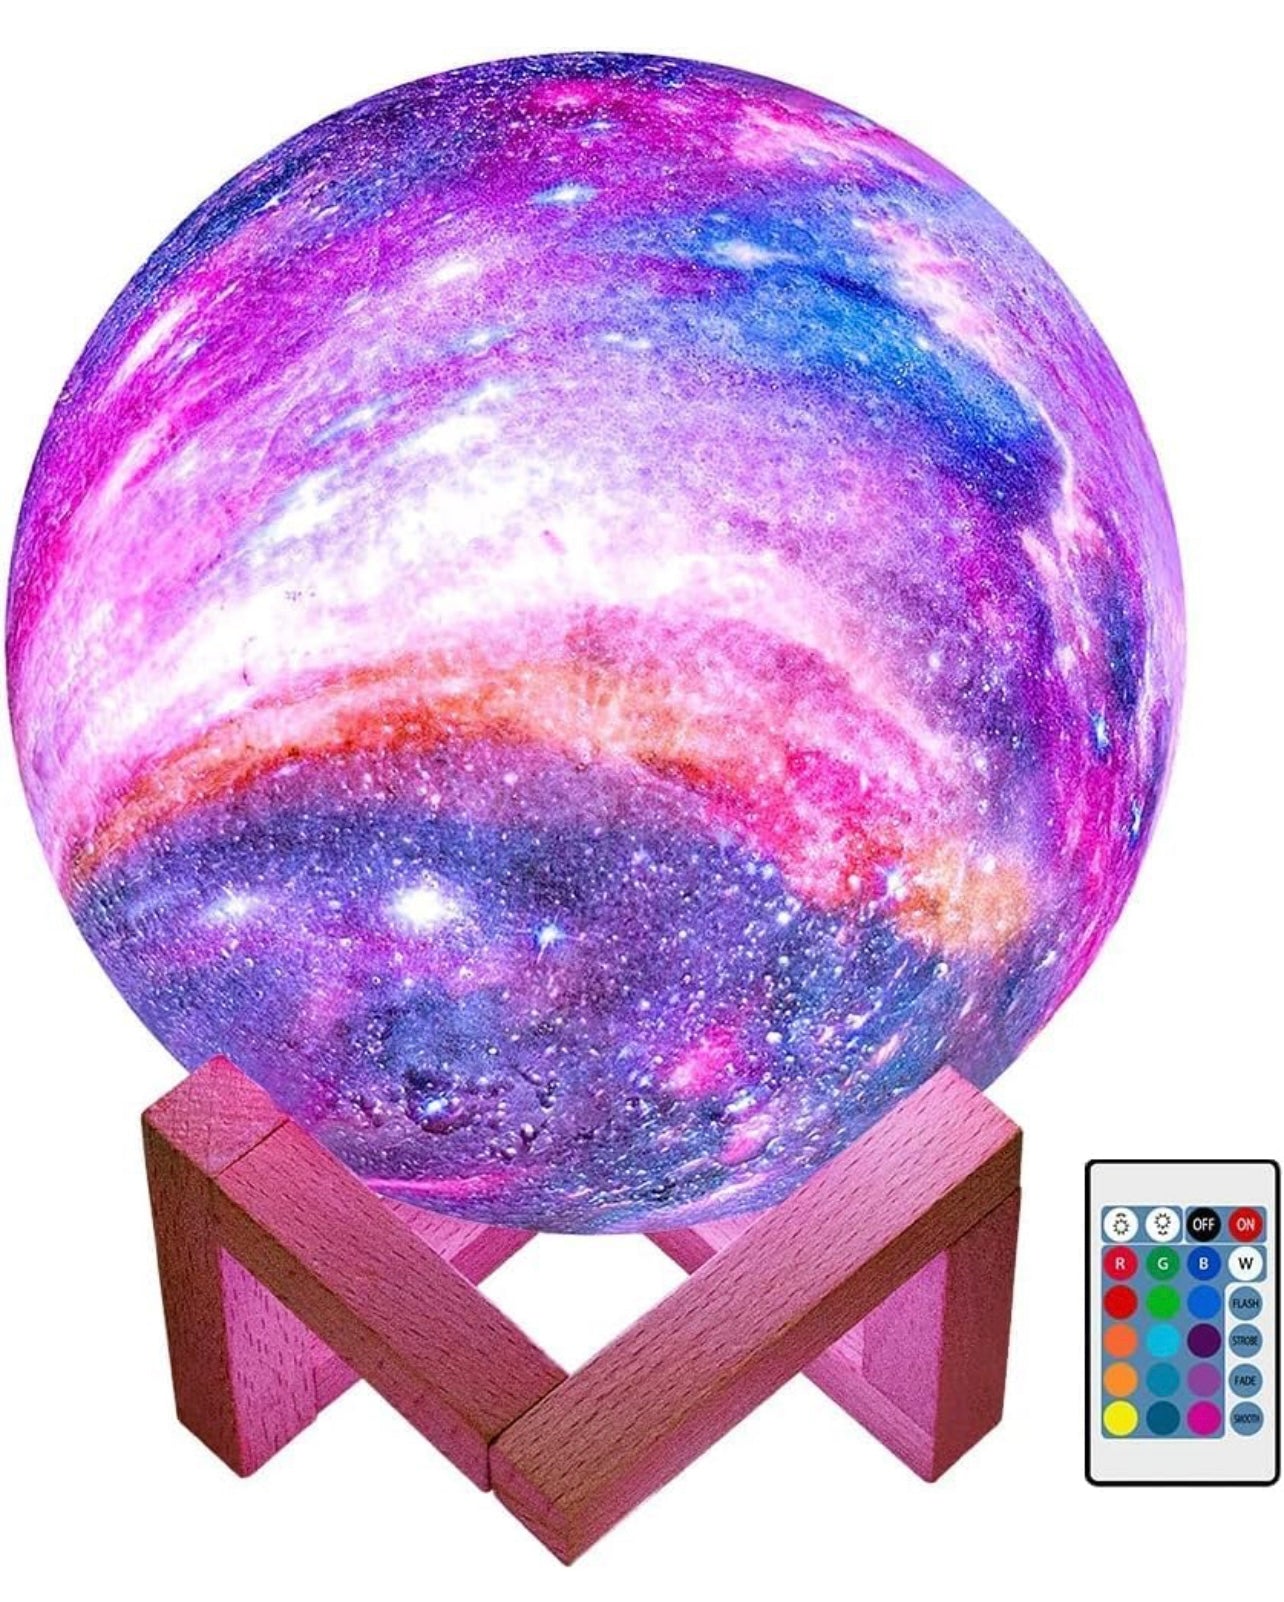 Galaxy Moon Lamp 16 Colours in 1 with Remote and Touch Sensor With Wooden Stand Rechargeable